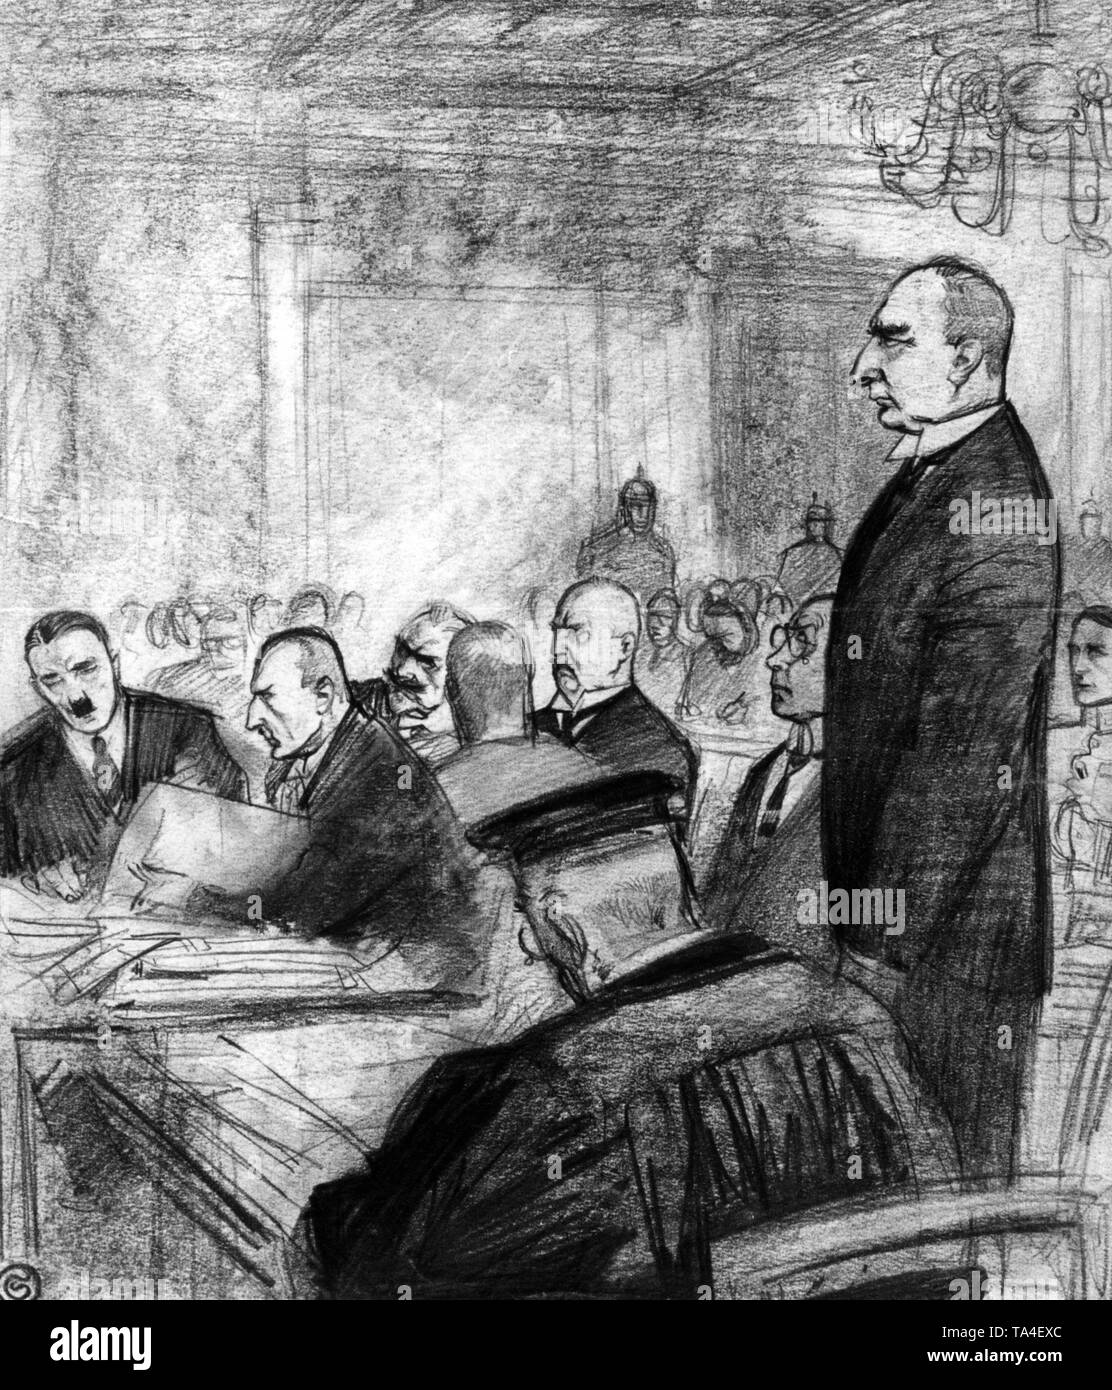 Drawing depicting a hearing of Hermann Kriebel during the Hitler trial. From left to right: Adolf Hitler, one of his defenders, behind them General Erich Ludendorff, the former Munich Police Chief Ernst Poehner (with glasses), Hermann Kriebel (standing). Stock Photo